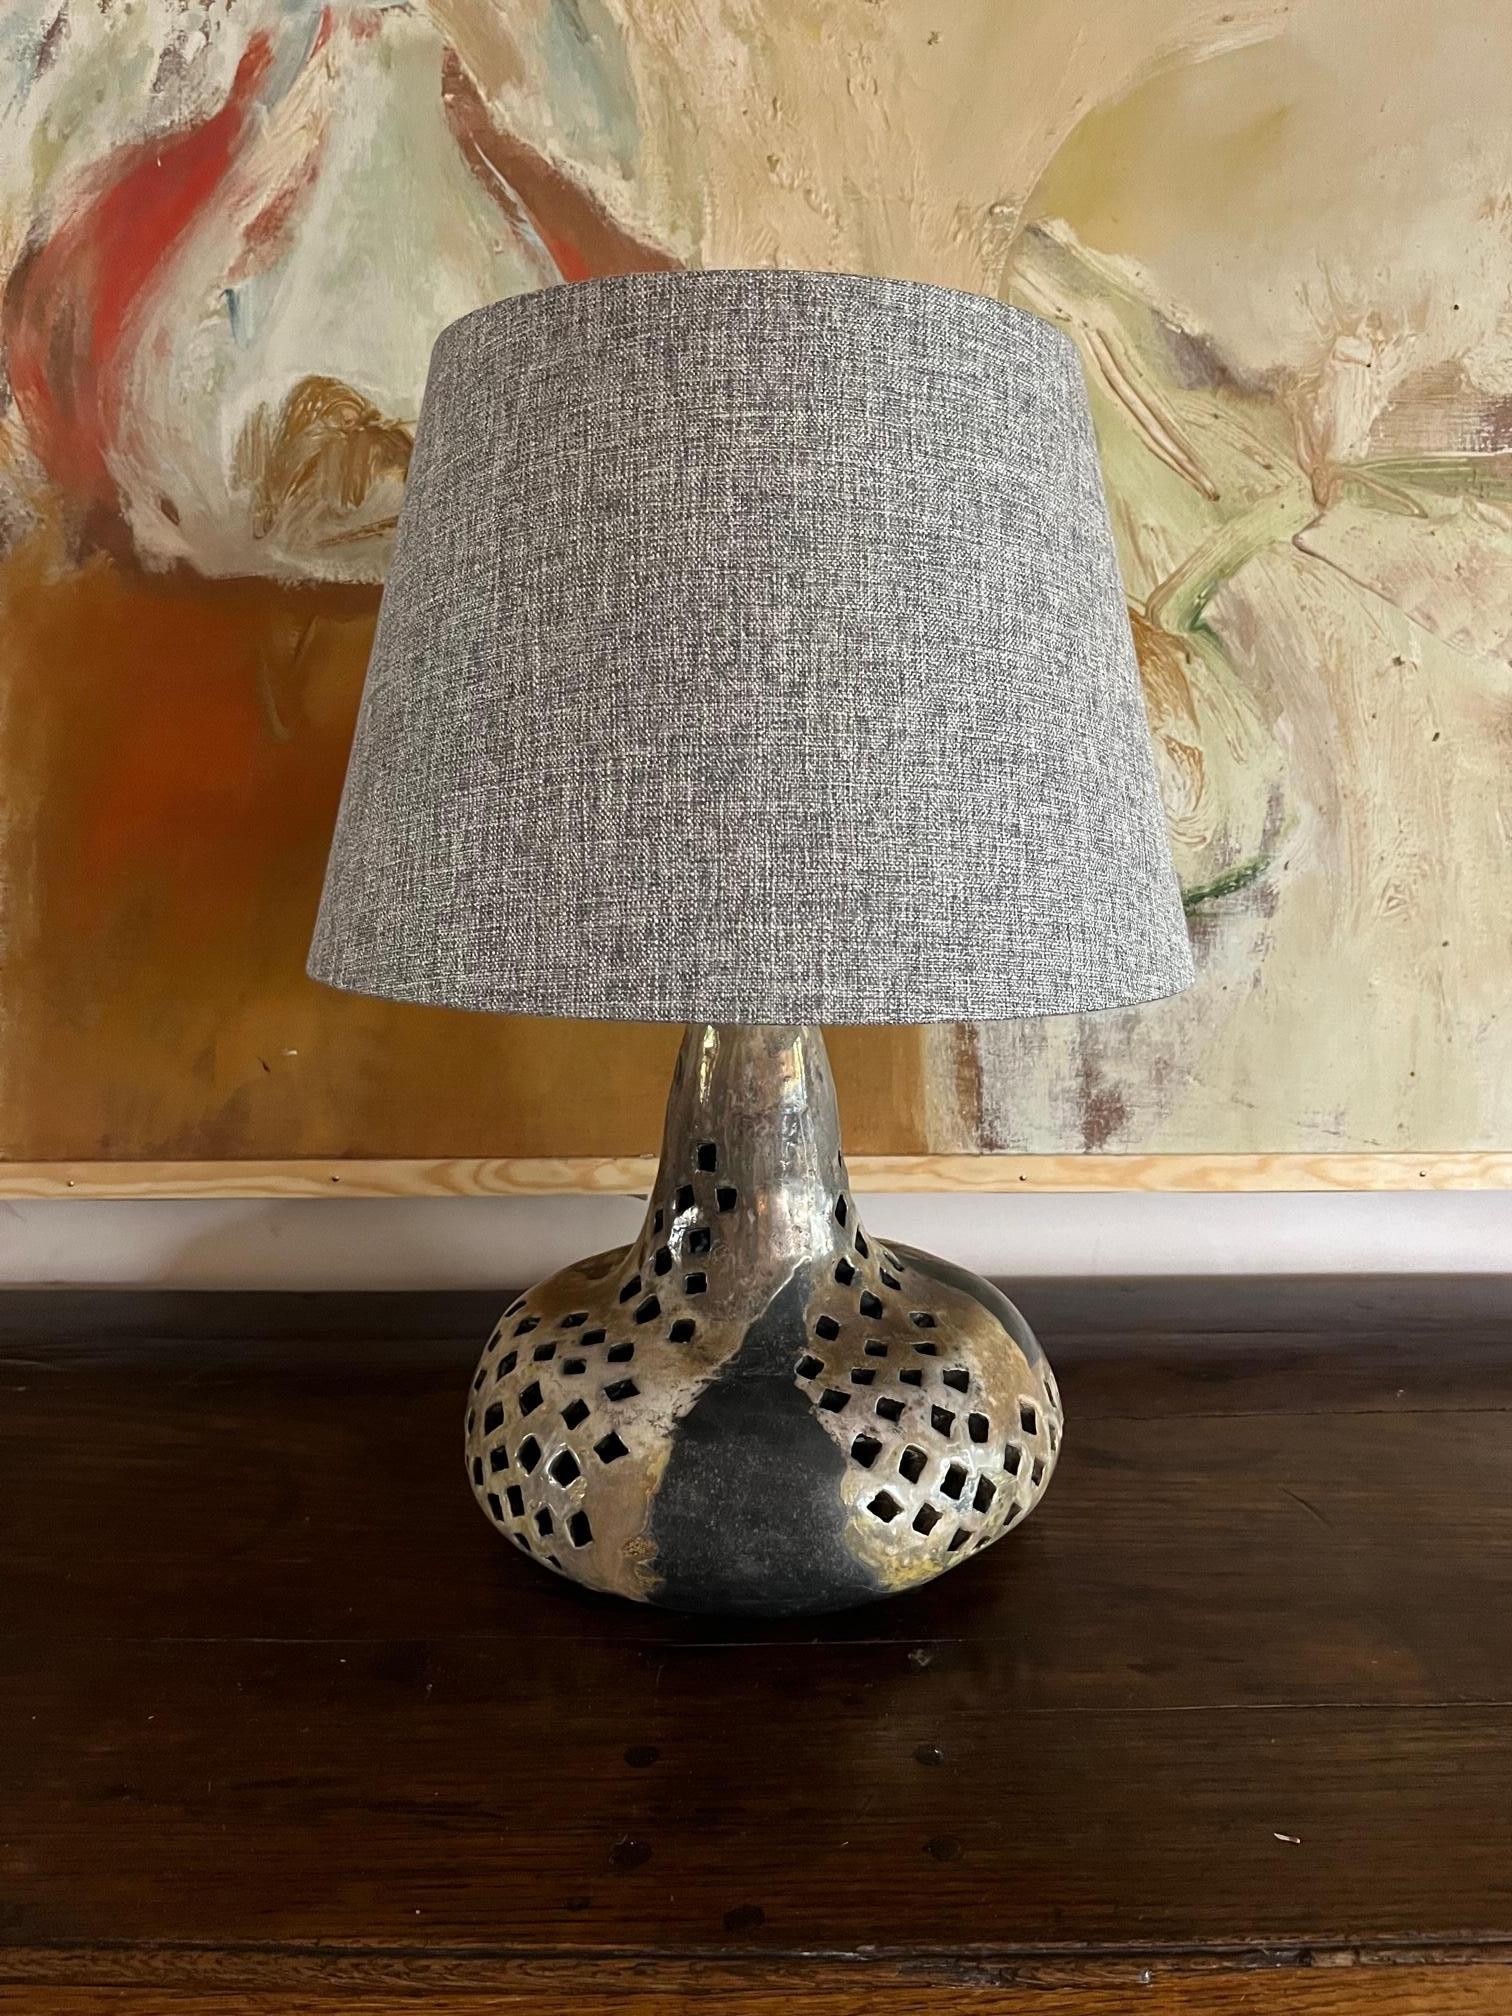 Pierced Glazed Ceramic Lamp with Internal Light, French, C.1970s In Good Condition For Sale In London, GB